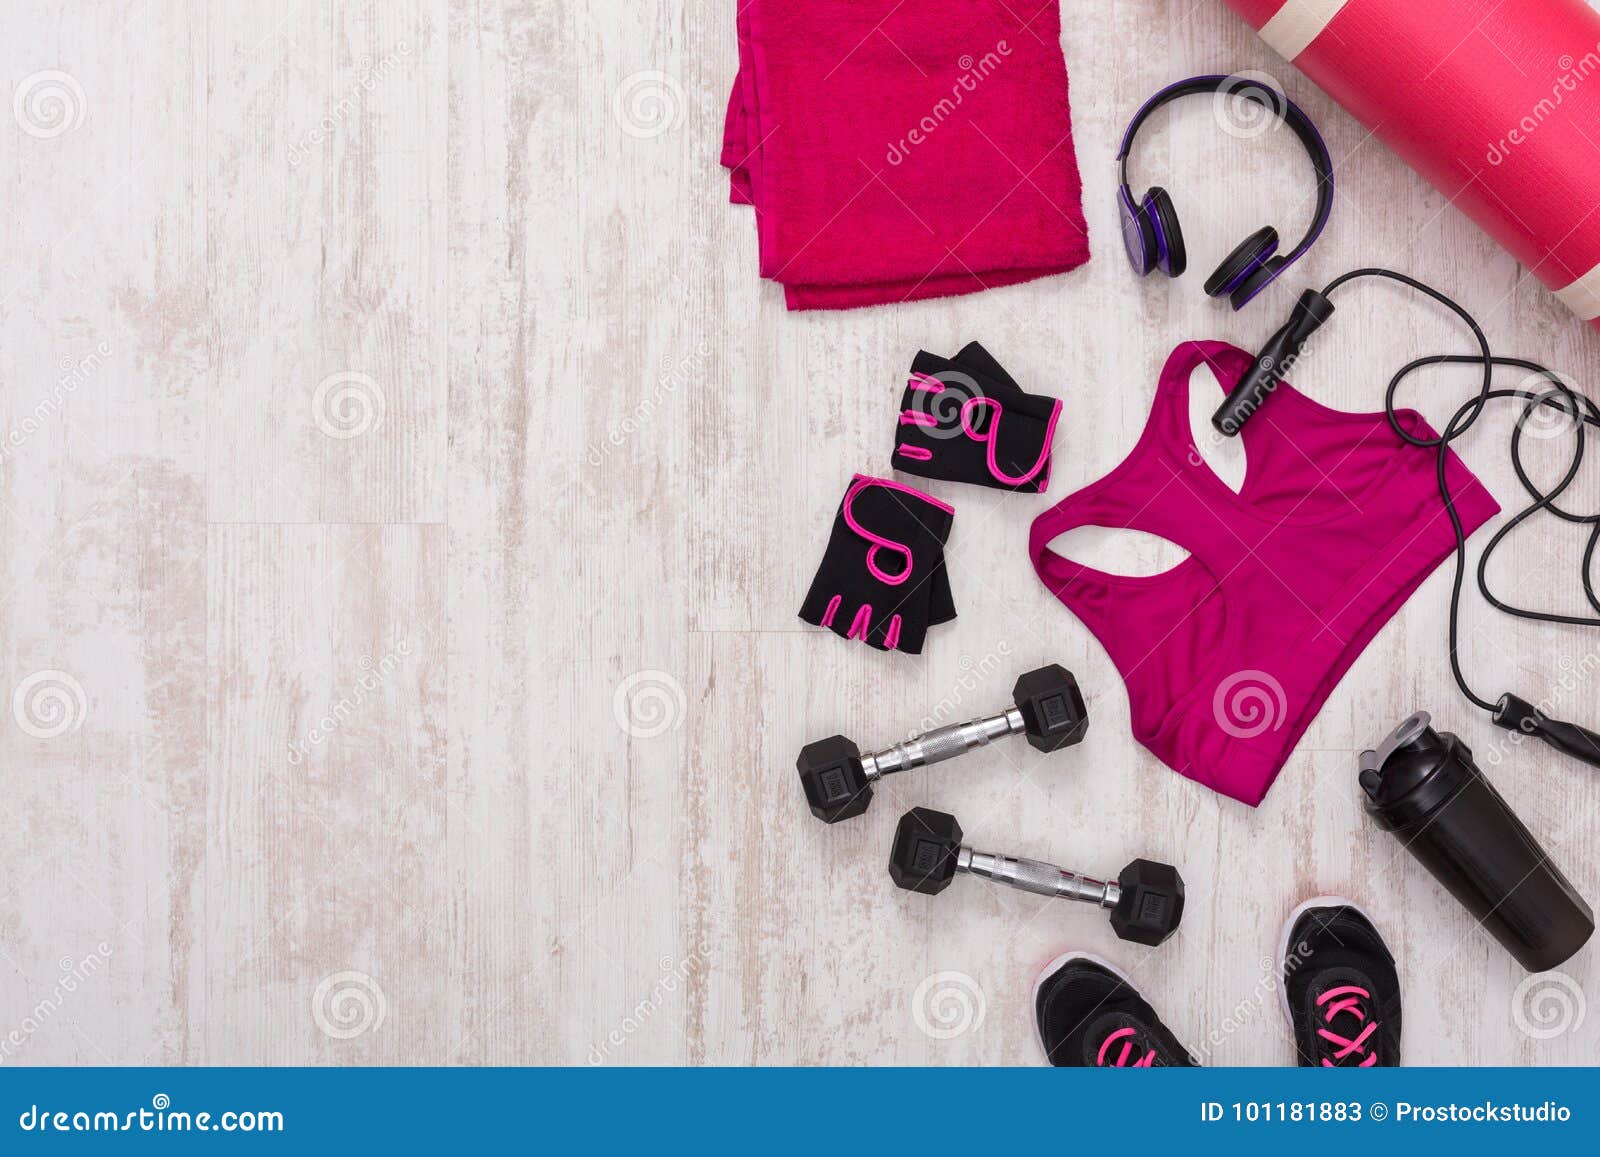 https://thumbs.dreamstime.com/z/sport-background-female-clothing-equipment-top-view-copy-space-set-new-fitness-outfit-women-active-lifestyle-body-care-101181883.jpg